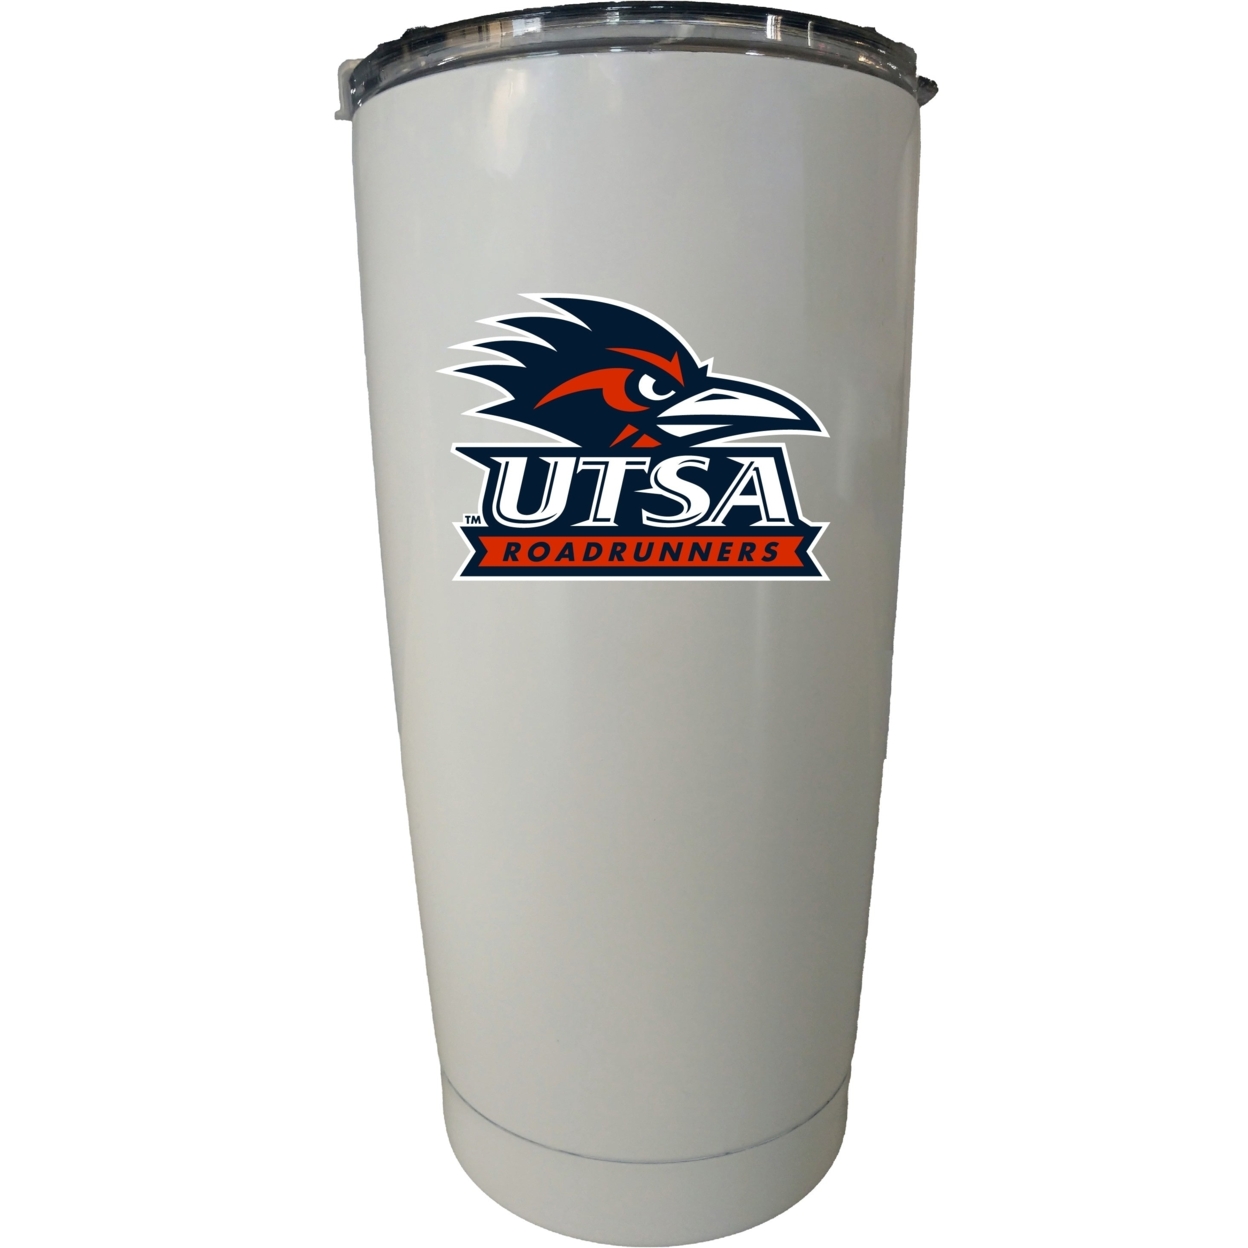 UTSA Road Runners 16 Oz Choose Your Color Insulated Stainless Steel Tumbler Glossy Brushed Finish - White